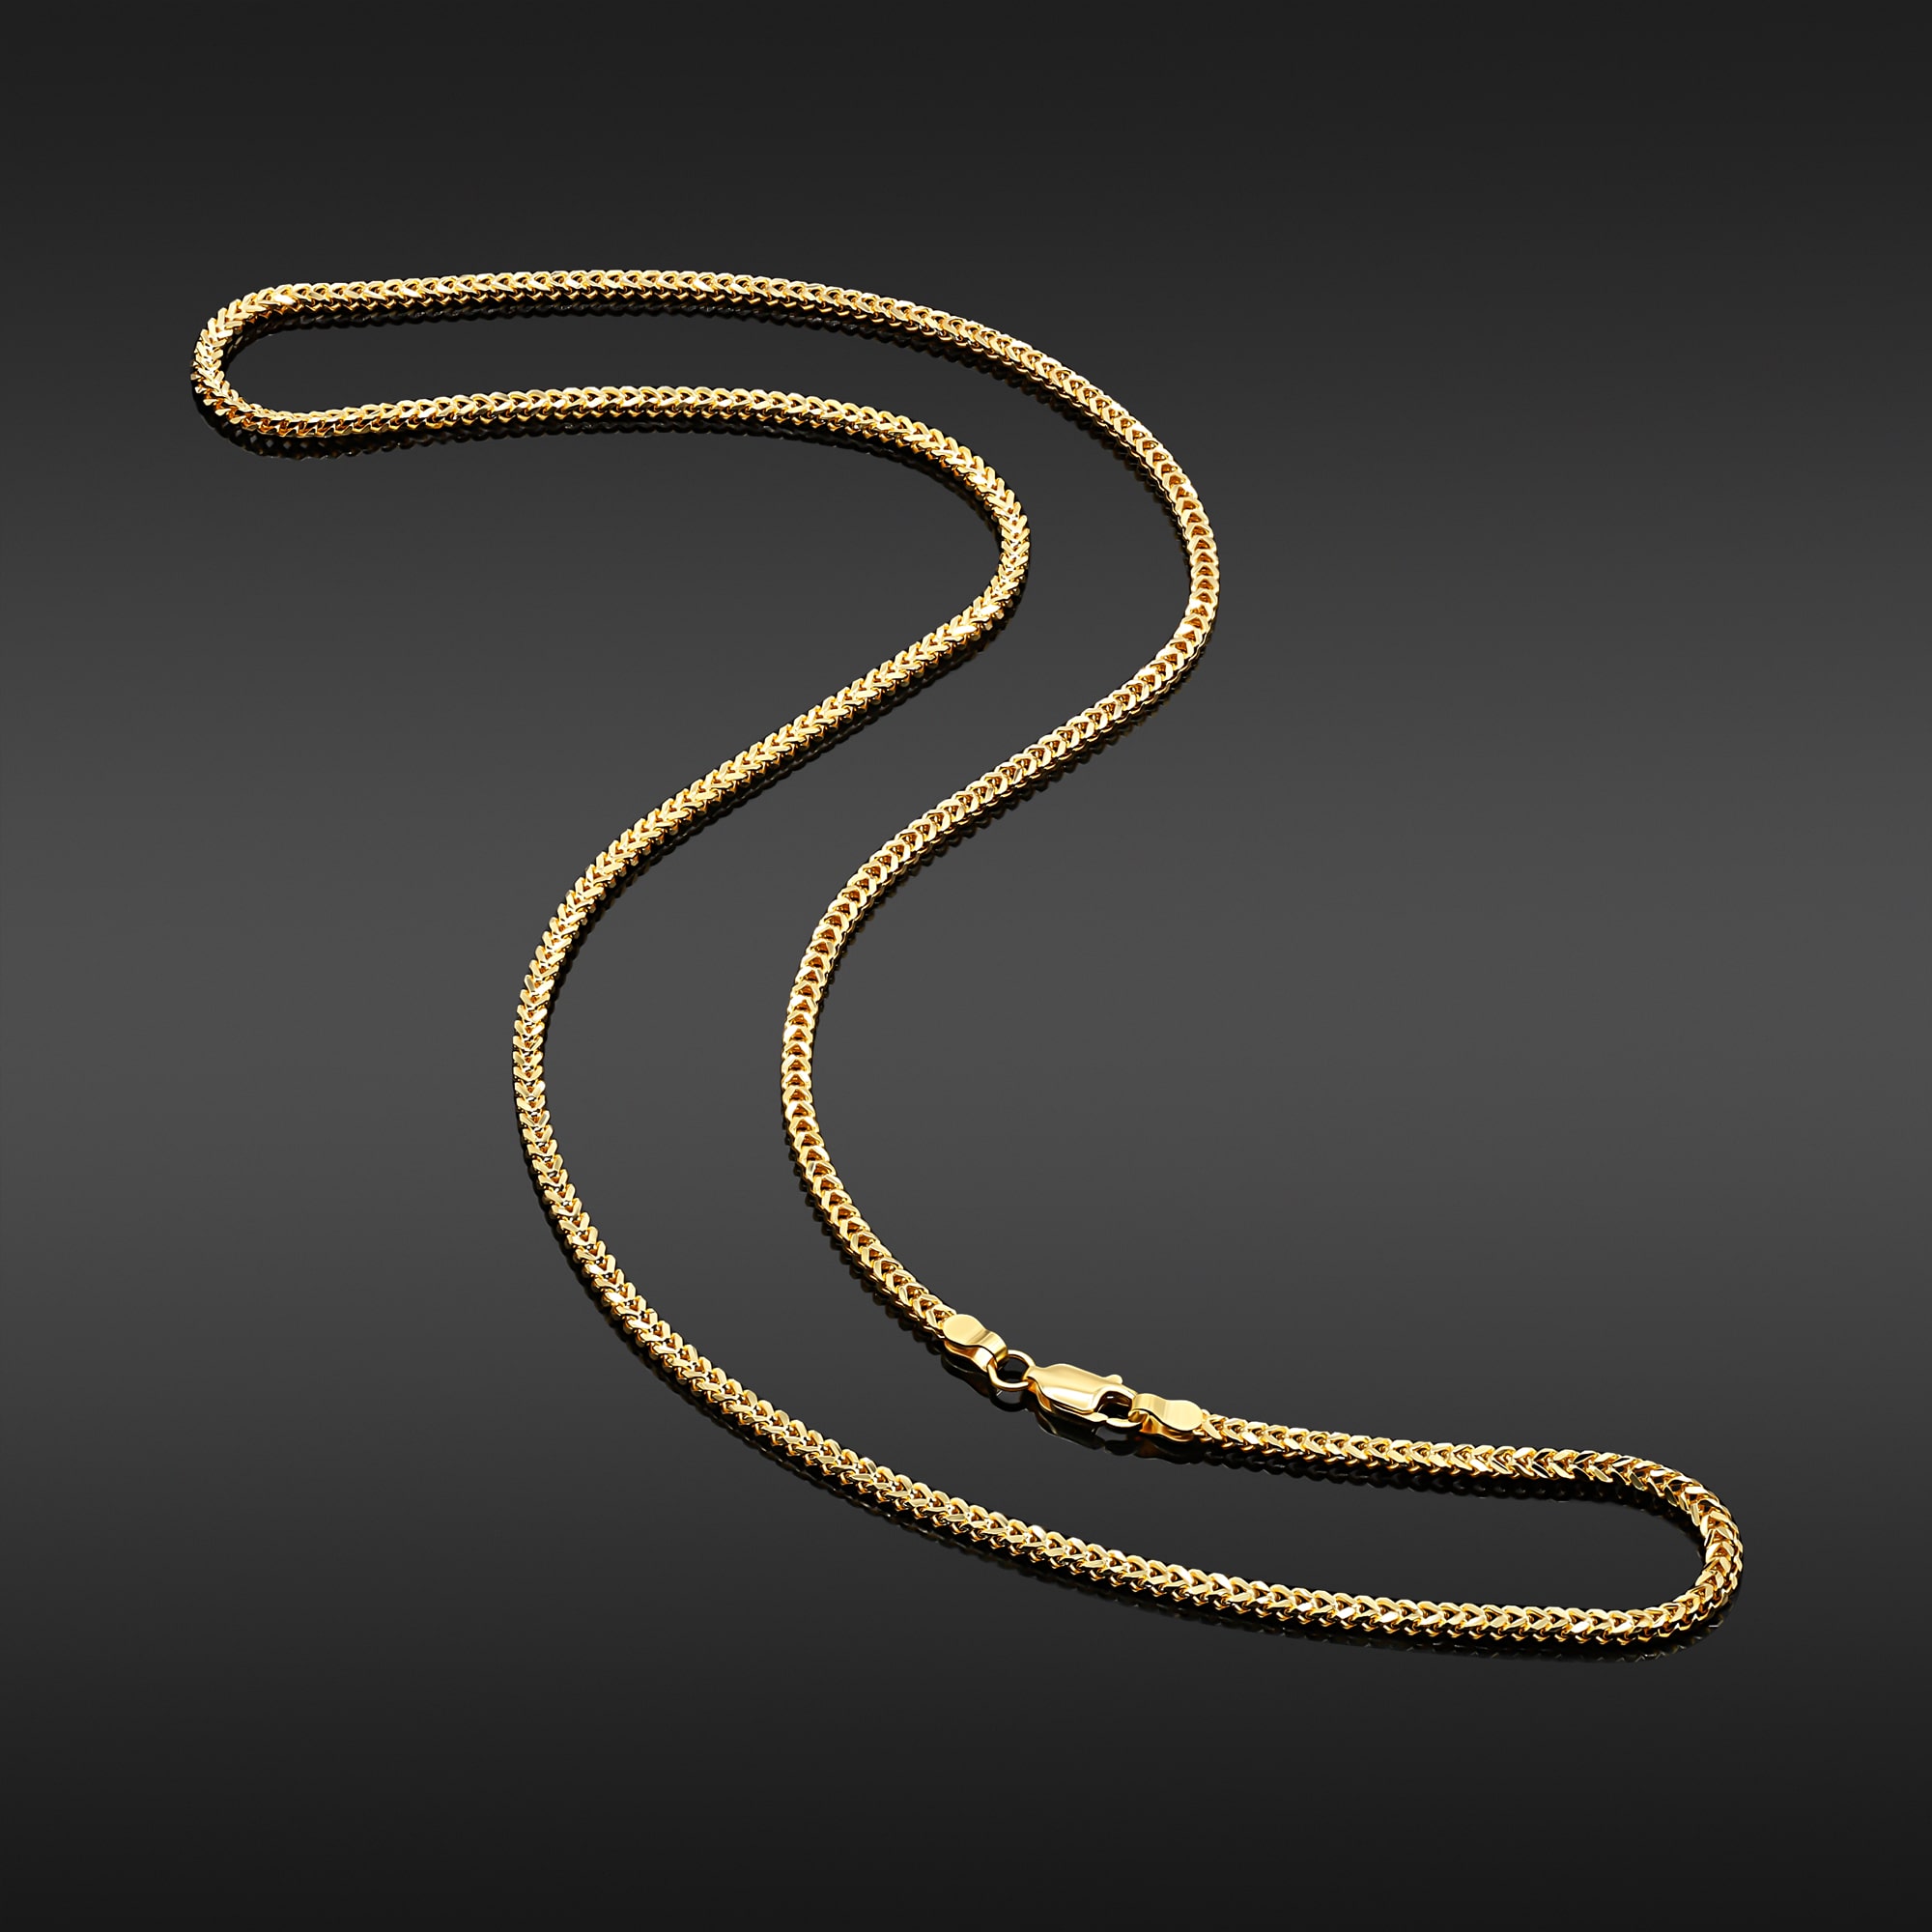 22K Gold Foxtail Chain – 16 Inch